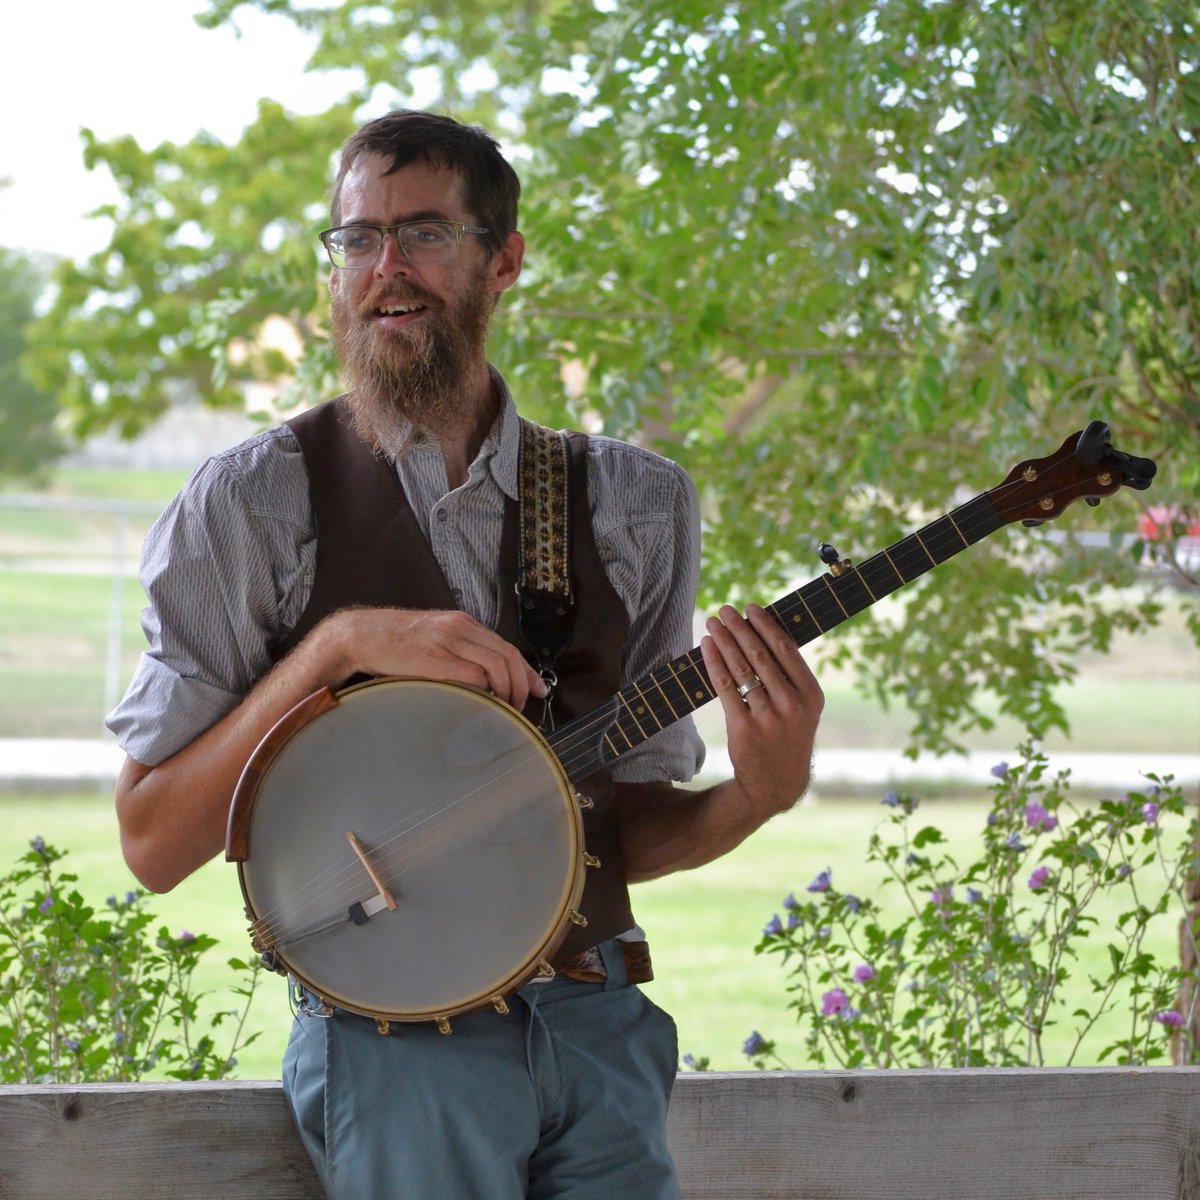 Listen to live music at the Indian Creek Library next Tuesday! John Depew will be playing from 7-8:15pm, so be sure to stop by!